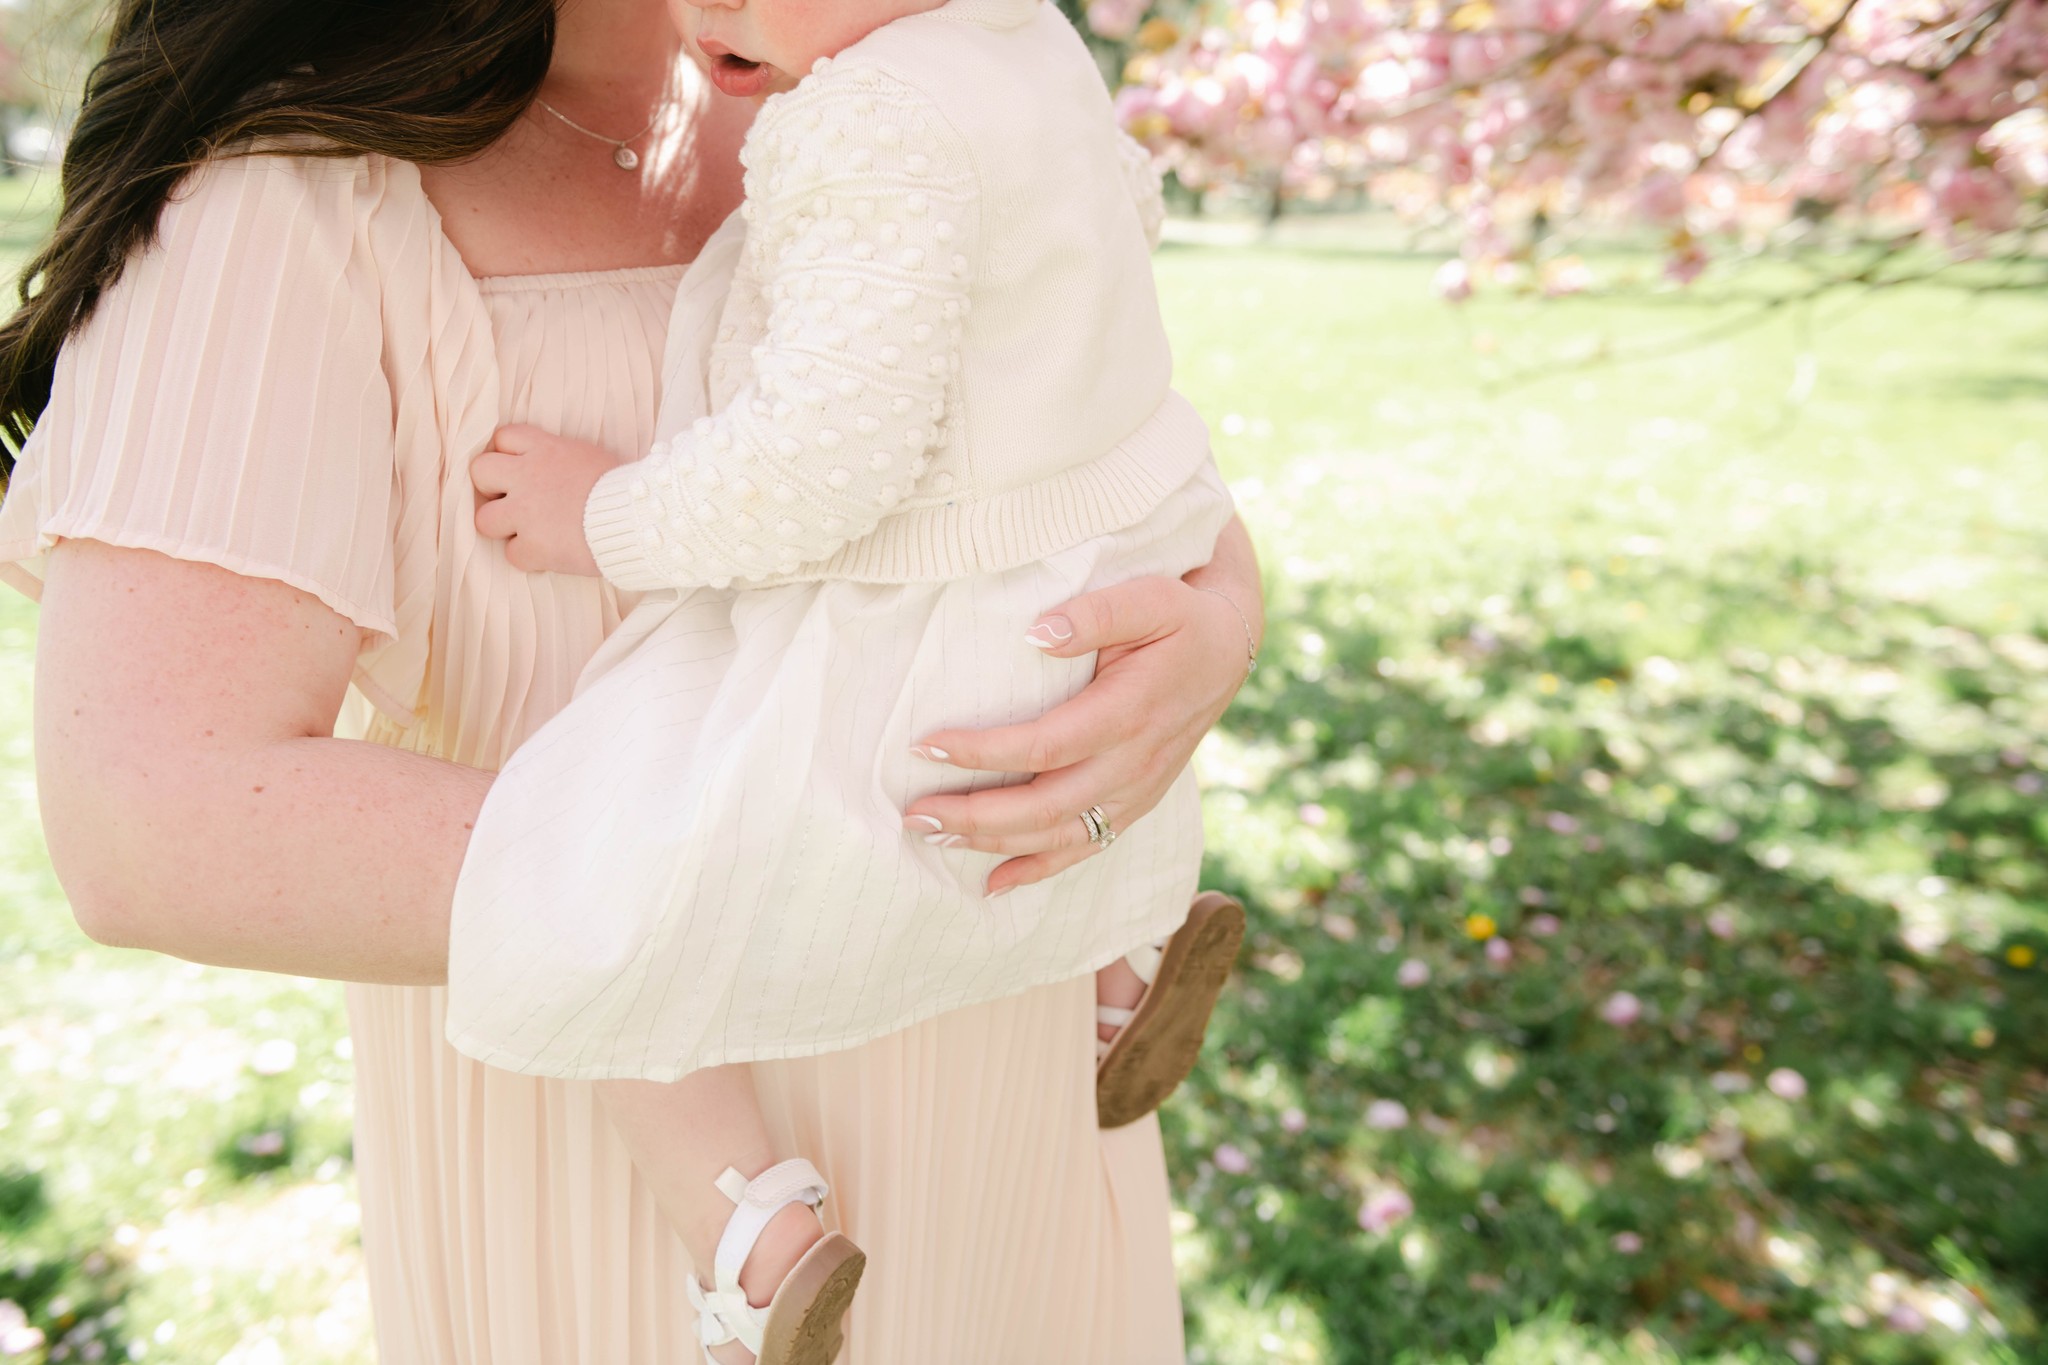 Details of a mother carrying her toddler daughter while walking under a blooming pink tree